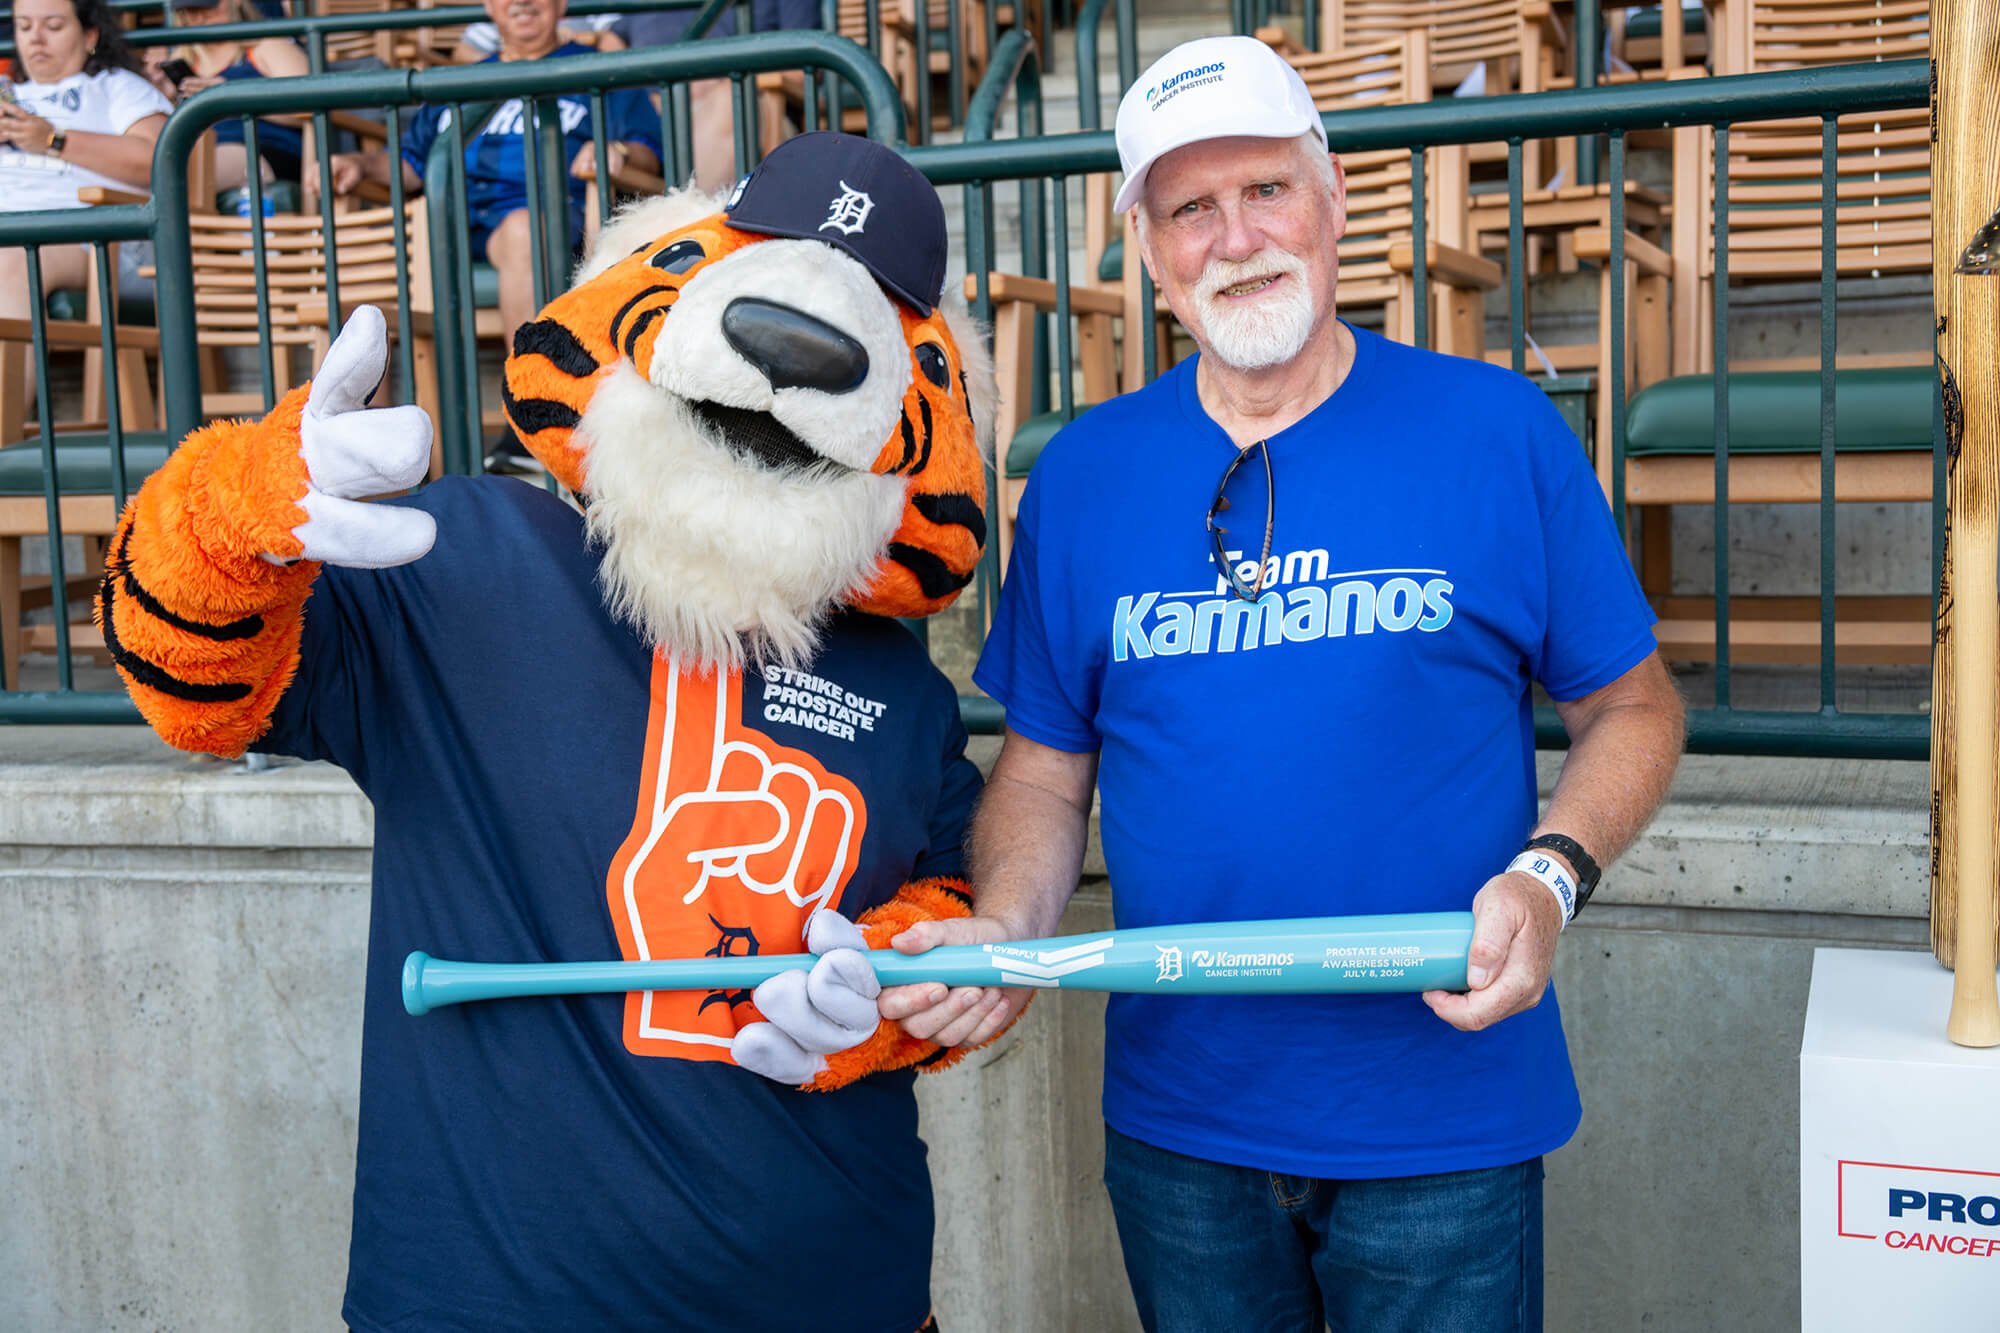 Dwight Hergert was recognized at the Prostate Cancer Awareness Night Game with the Detroit Tigers.